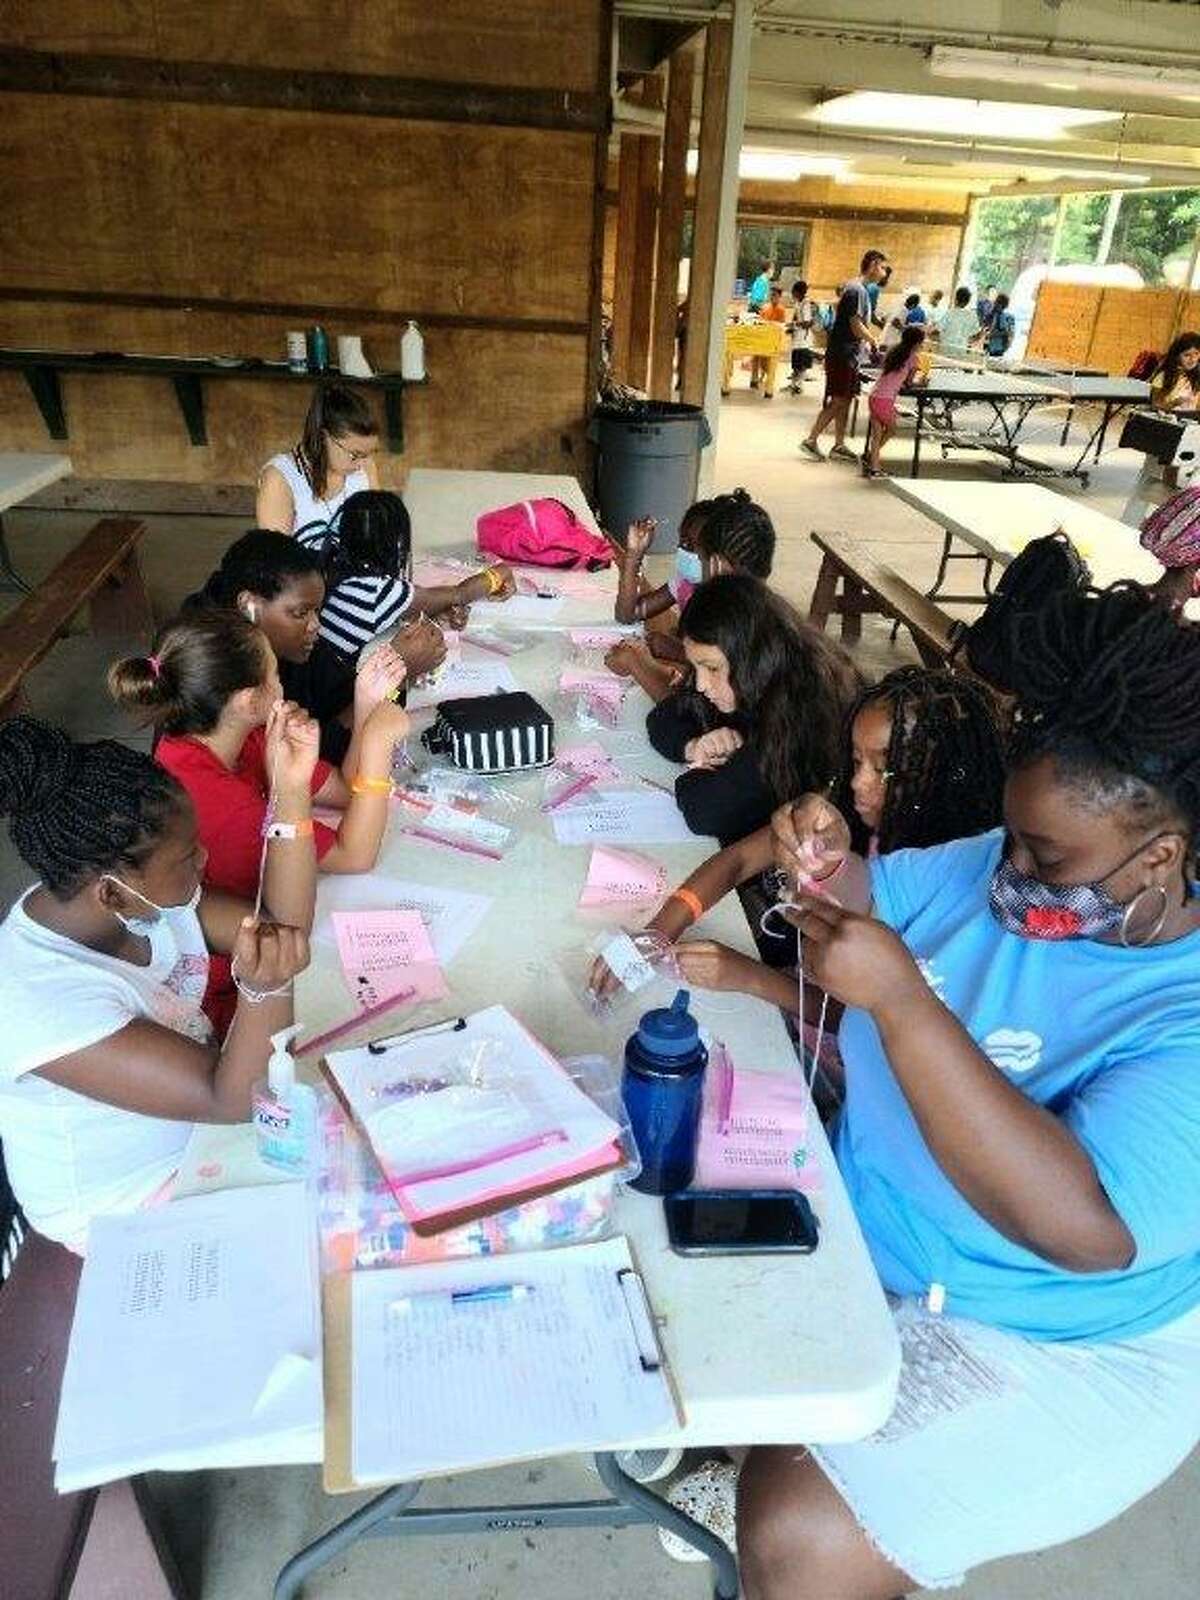 The Girl Scouts of Connecticut are hiring for community outreach program facilitators for its Summer in the City Experience. The summer camp program was created over 10 years ago in partnership with school superintendents and community agencies to provide Girl Scout learning opportunities in underserved communities. 